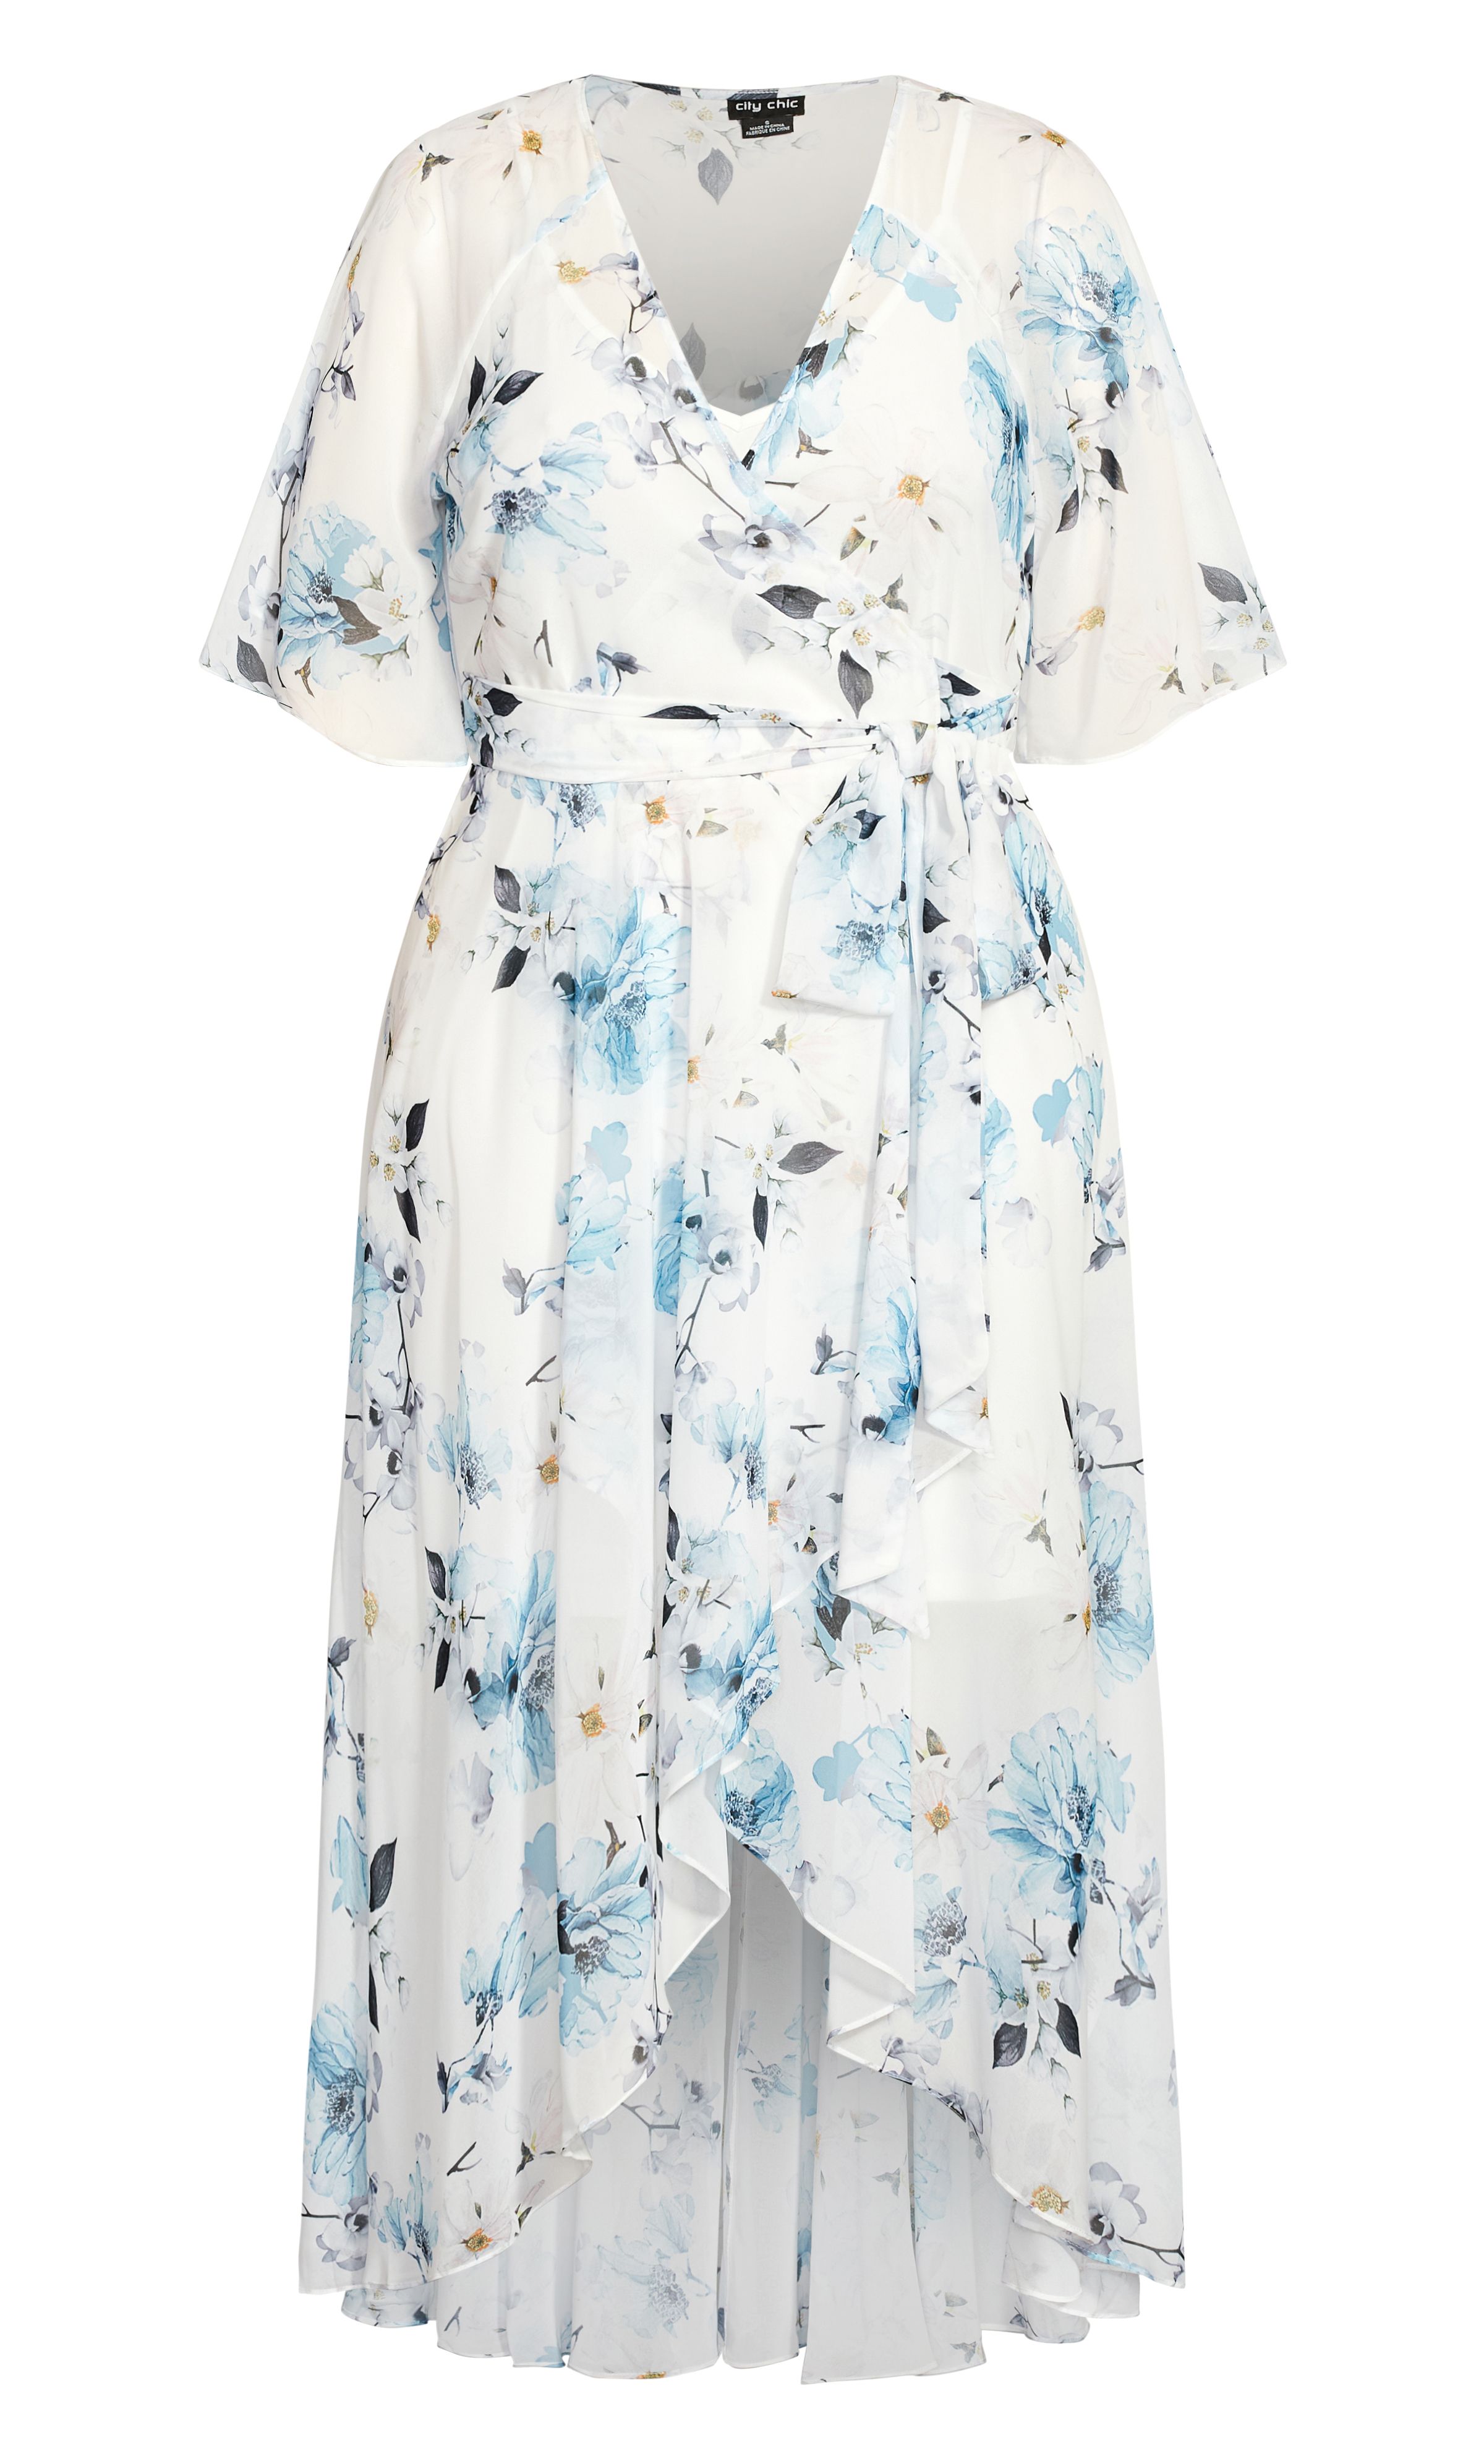 Get all wrapped up in the flirty, dreamy temptations of the Shy Orchid Maxi Dress. This wrap-style maxi includes a V-neckline, short sleeves and an all-over floral print for a truly indulgent style. Including a white cami, this stunning dress is perfect for garden parties, cocktail parties and brunches out. Key Features Include: - V-neckline - Wrap-style silhouette - Short flutter sleeves - Adjustable, self-tie to waist - Hi-lo hemline - Included cami with adjustable shoulder straps Pair this maxi dress with a pair of white strappy heels for a glamorous and elegant look.